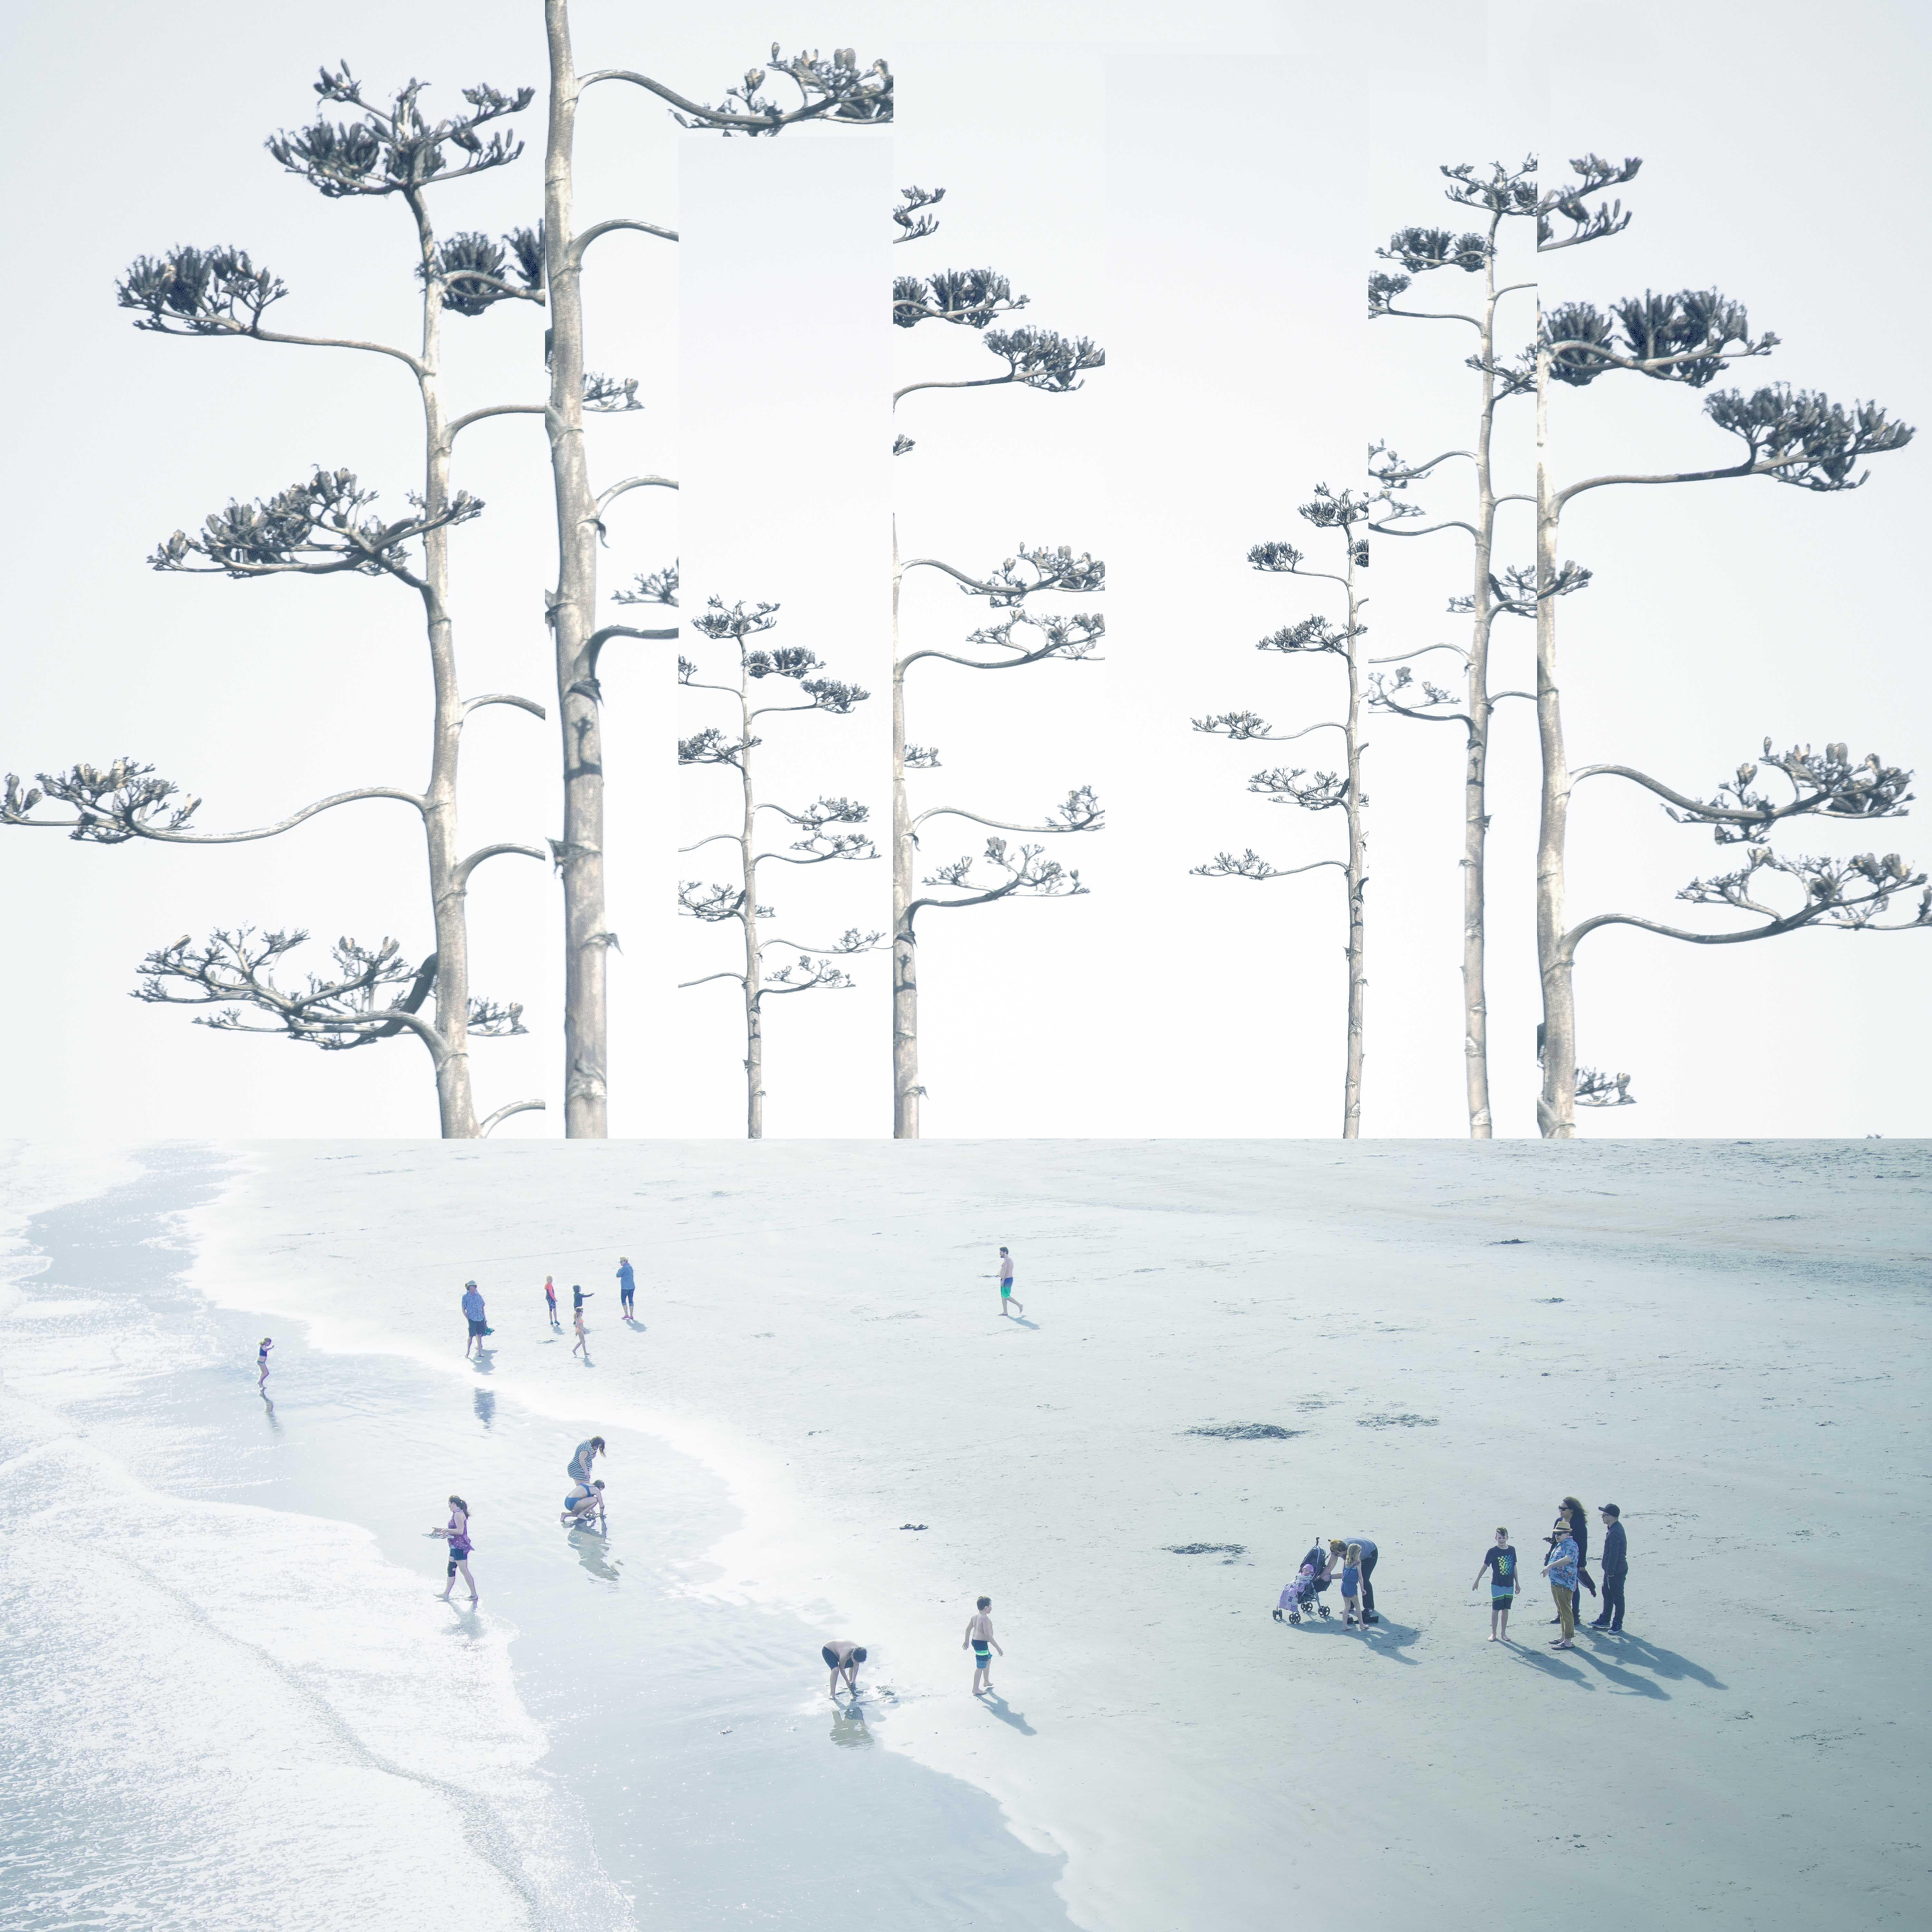 Sanctuary - beach, trees, people, abstract, manipulated, photograph on dibond